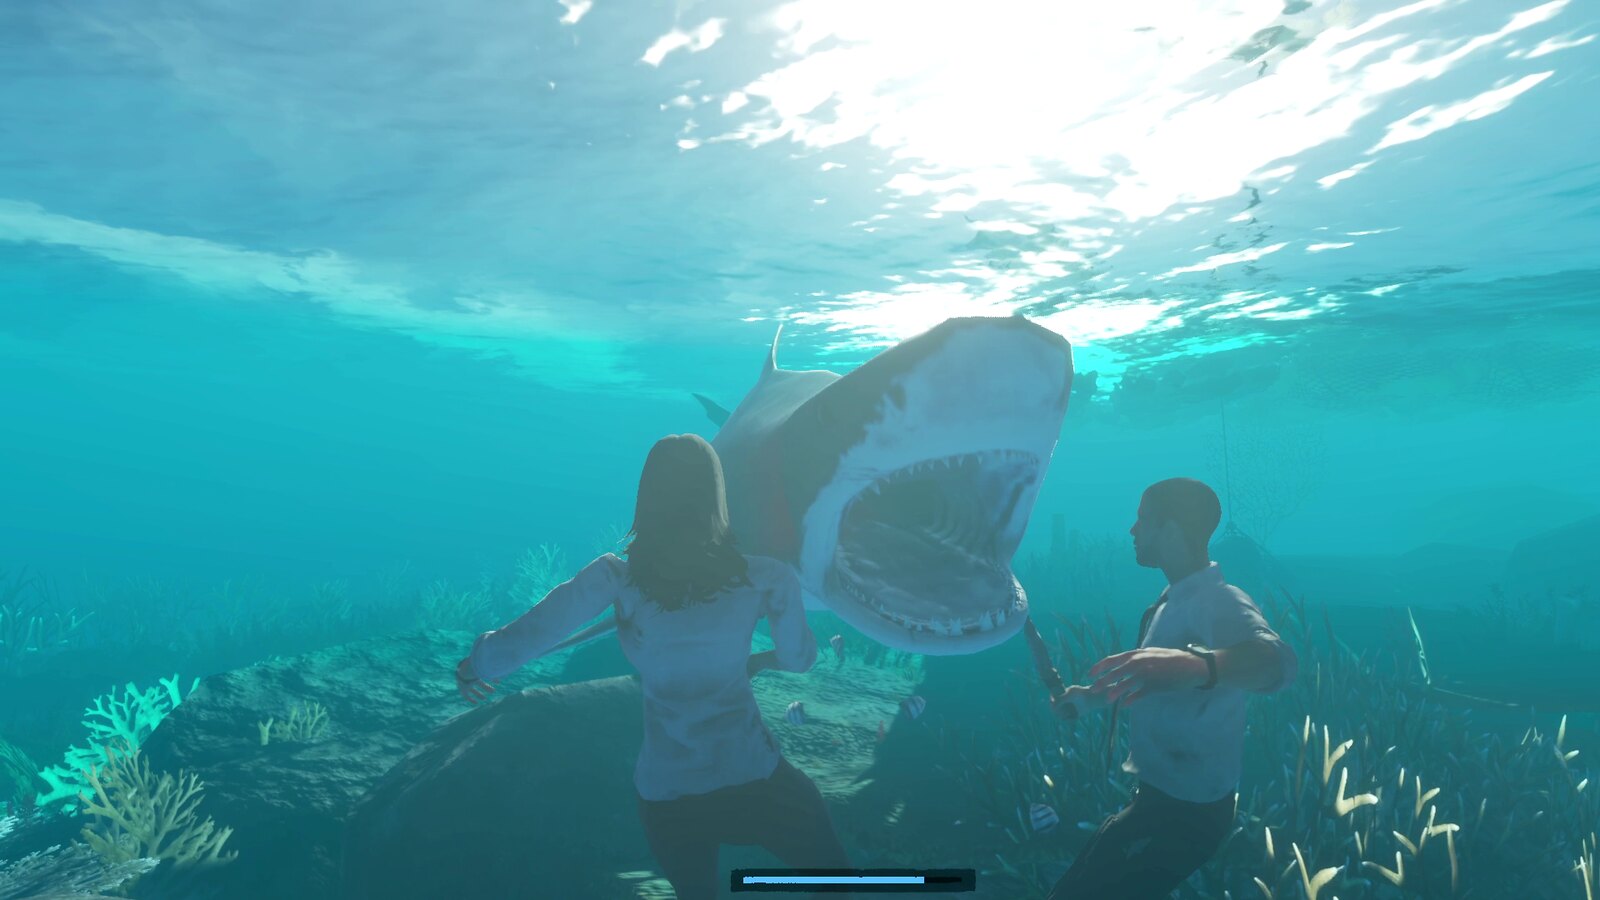 Stranded Deep - Official Online Co-op Launch Trailer